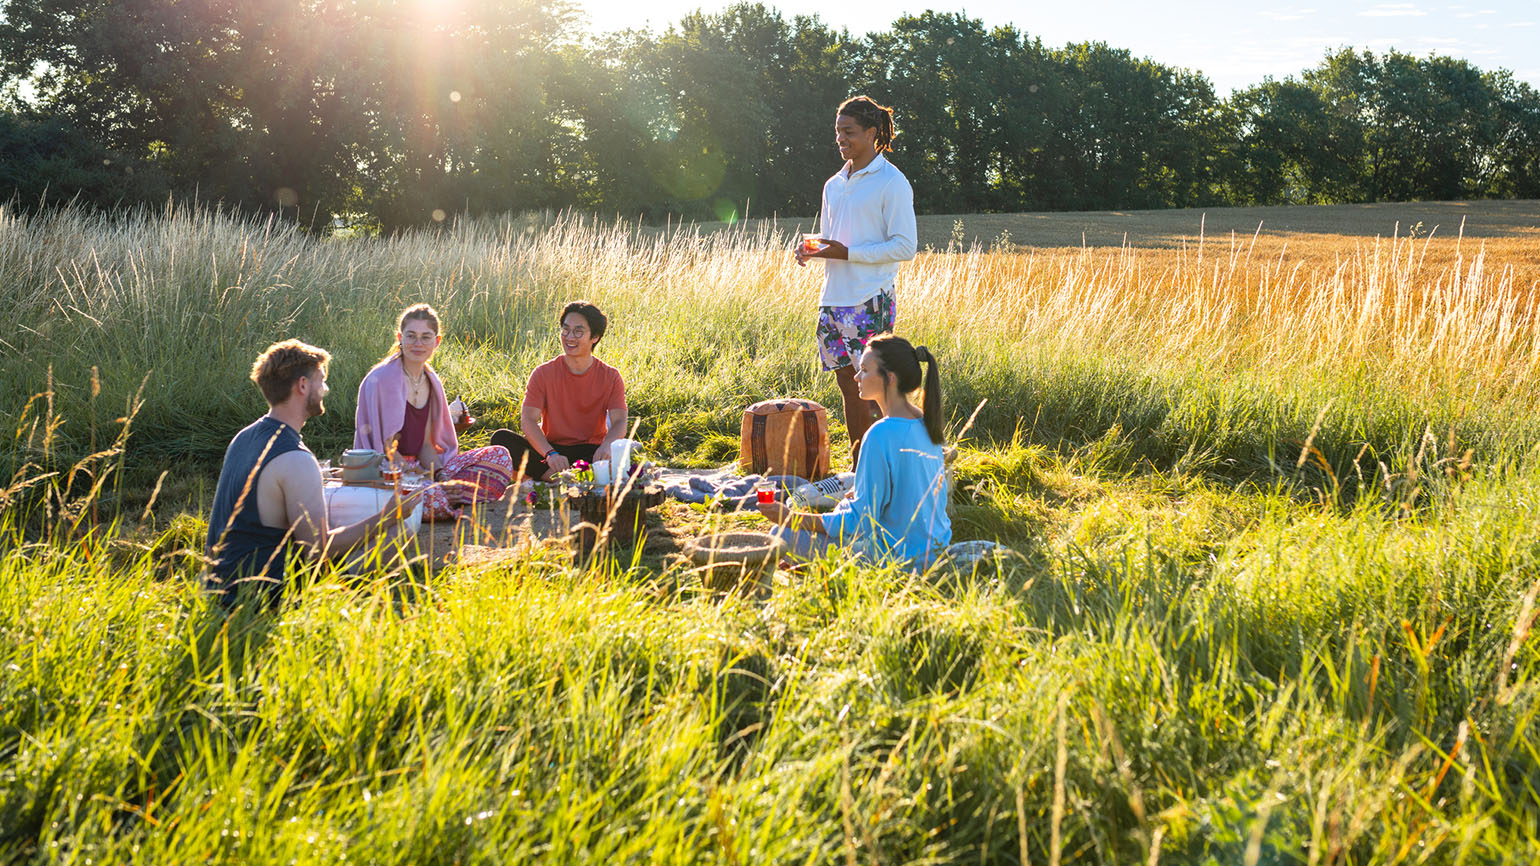 Friends enjoy Christian fellowship over a picnic outside in a field